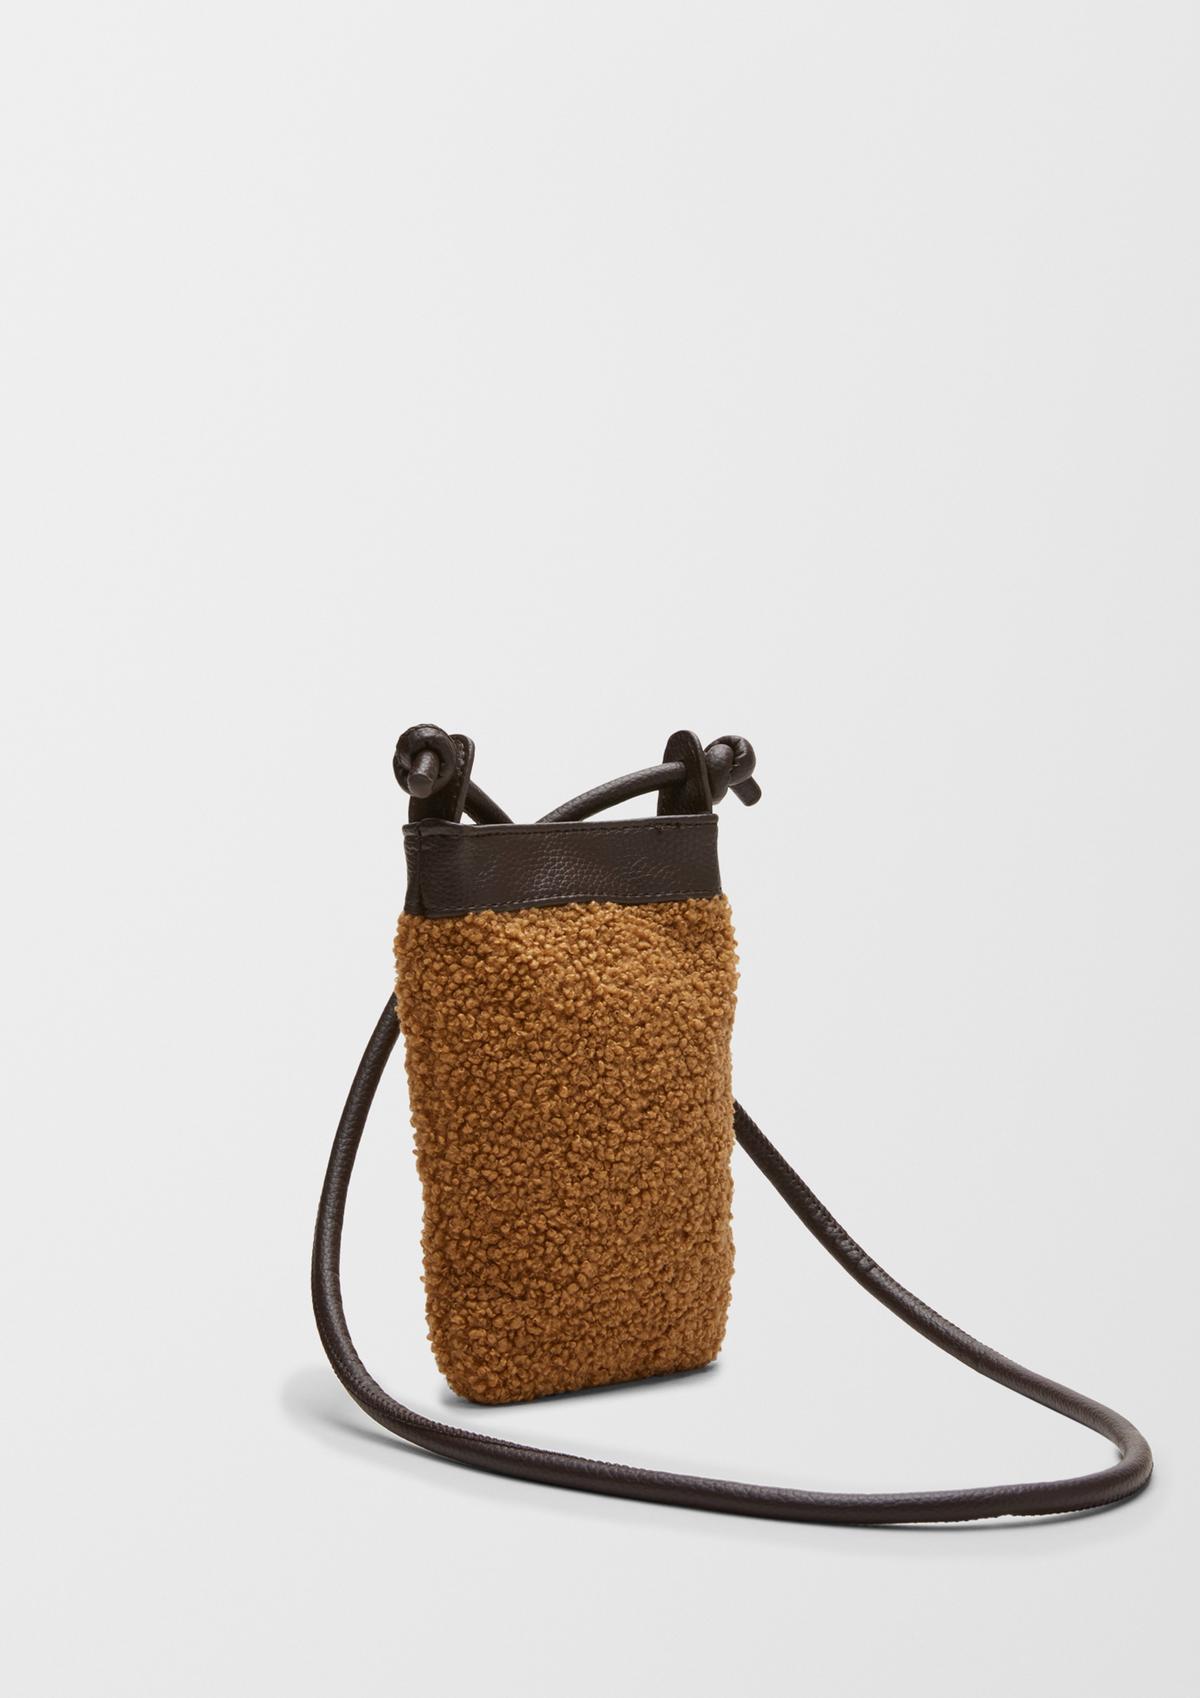 s.Oliver Mobile phone bag with teddy plush